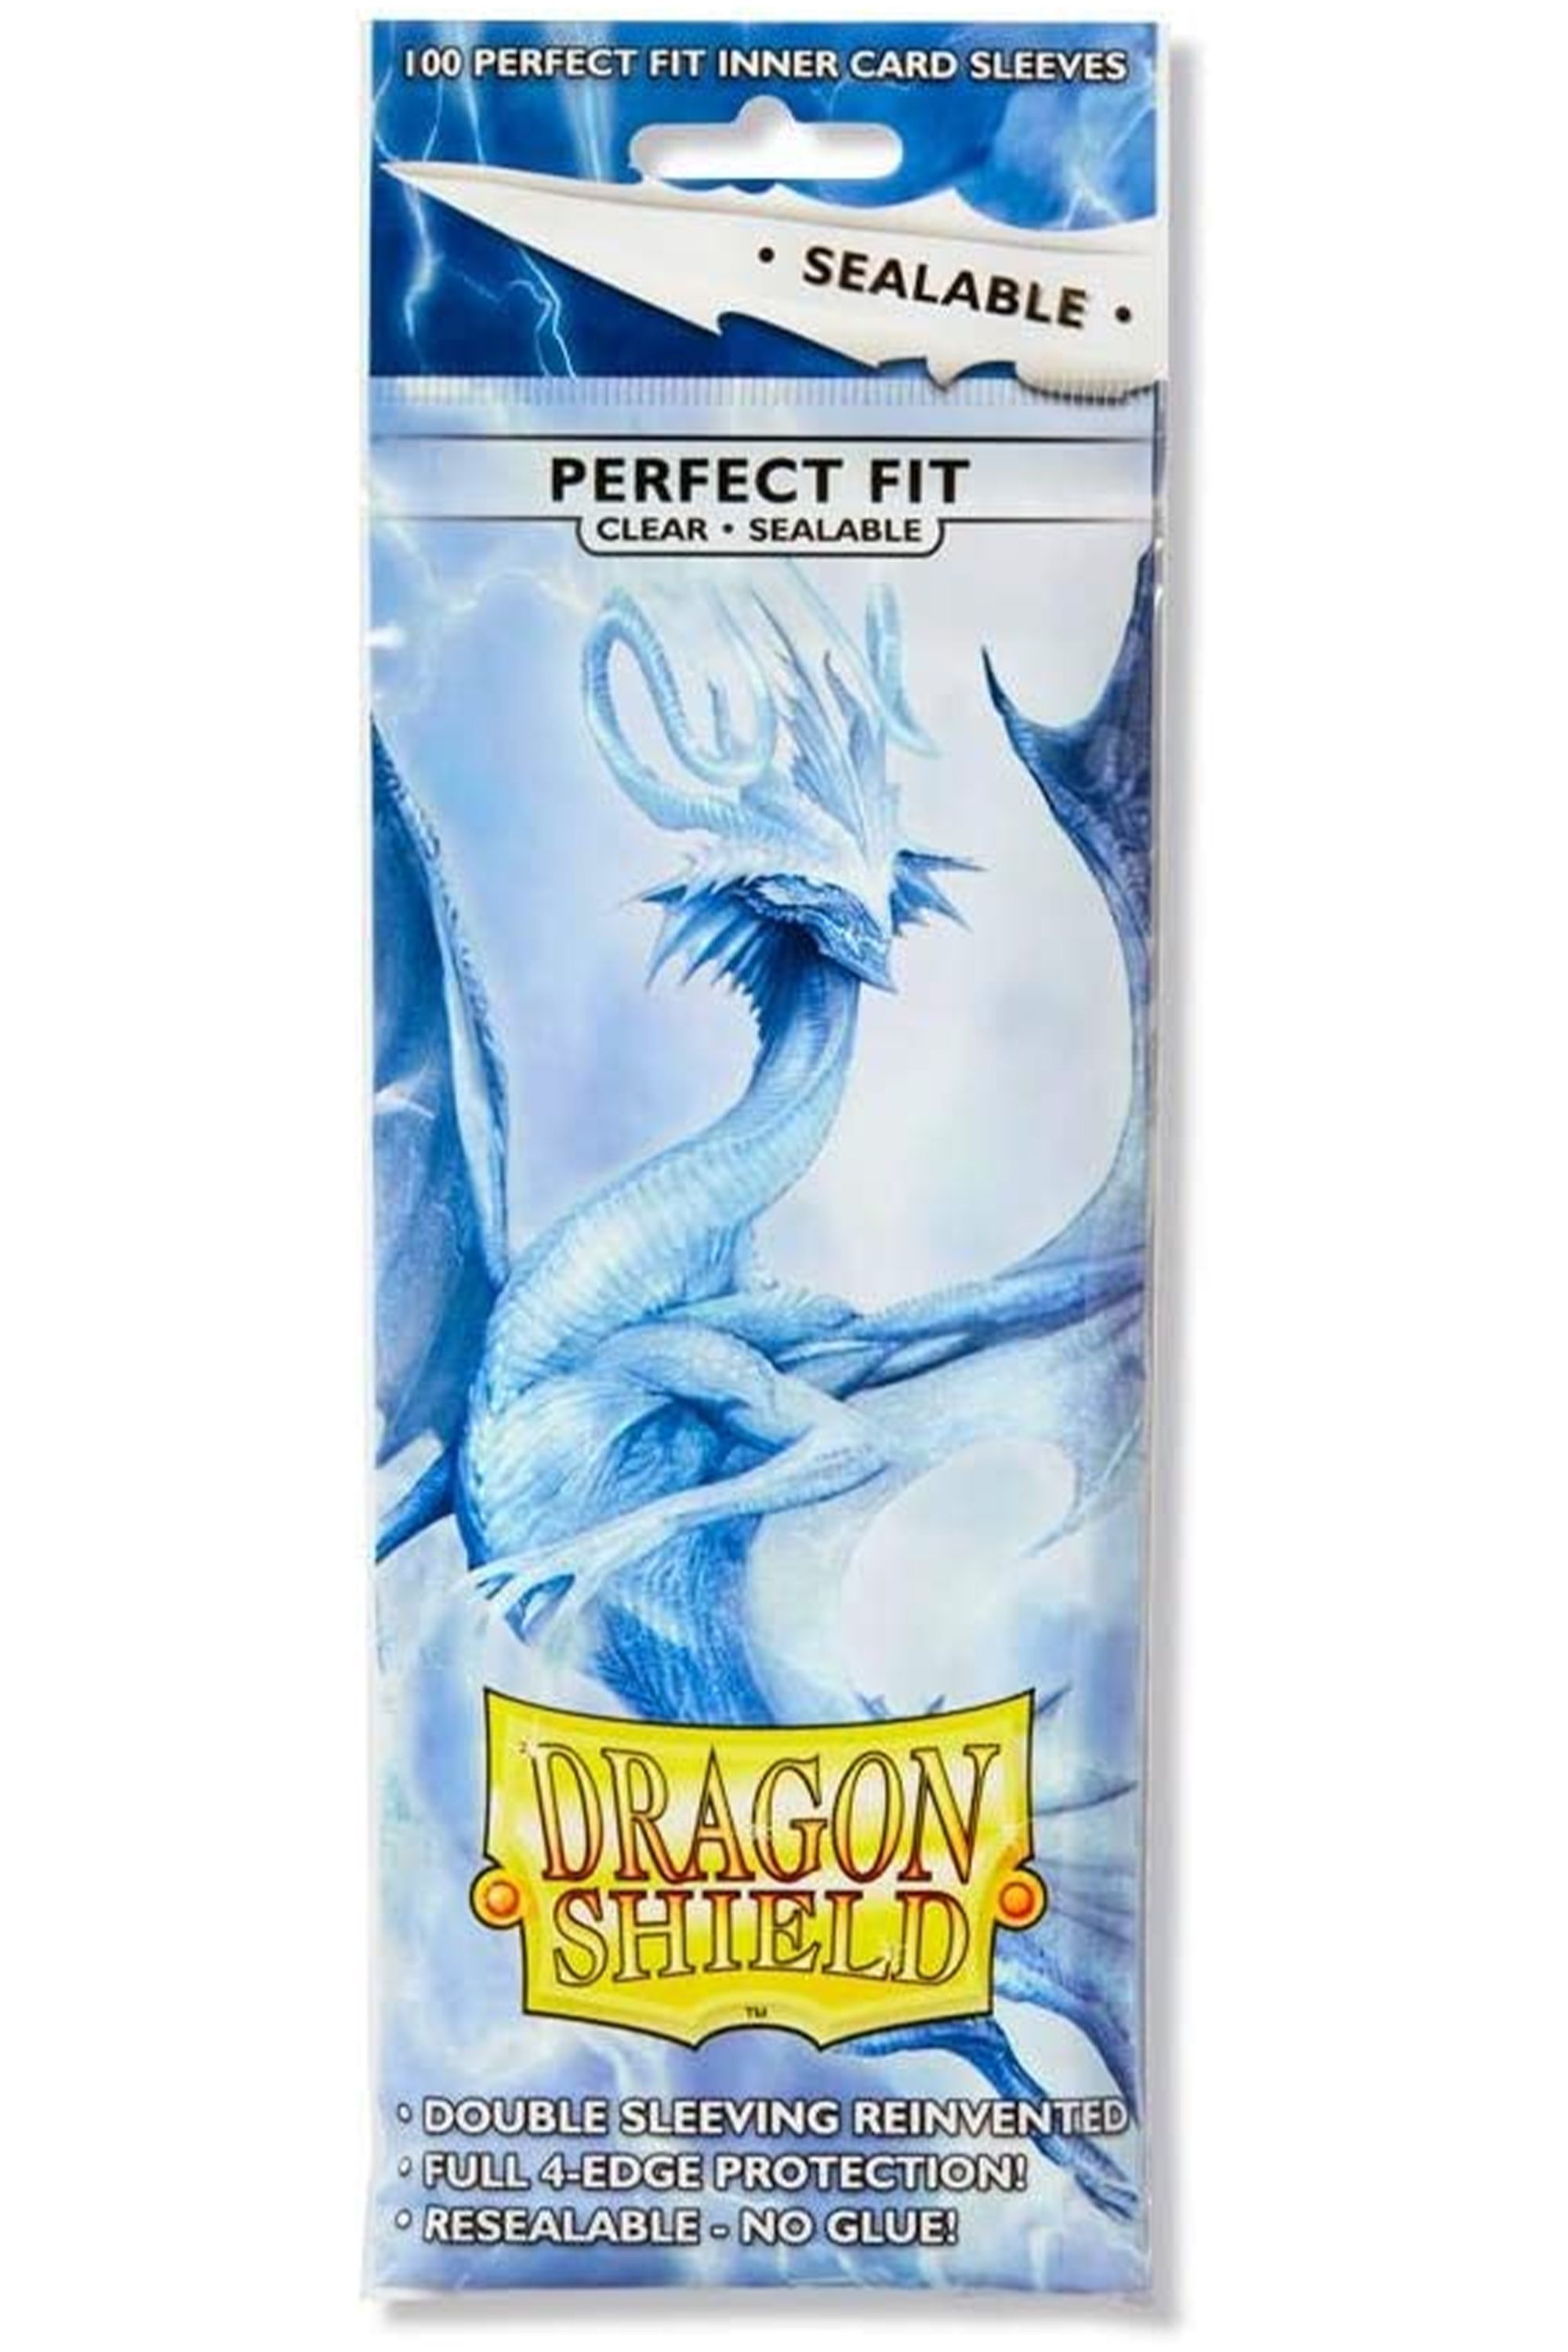 Dragon Shield - Have you tried our Perfect Fit Sealable